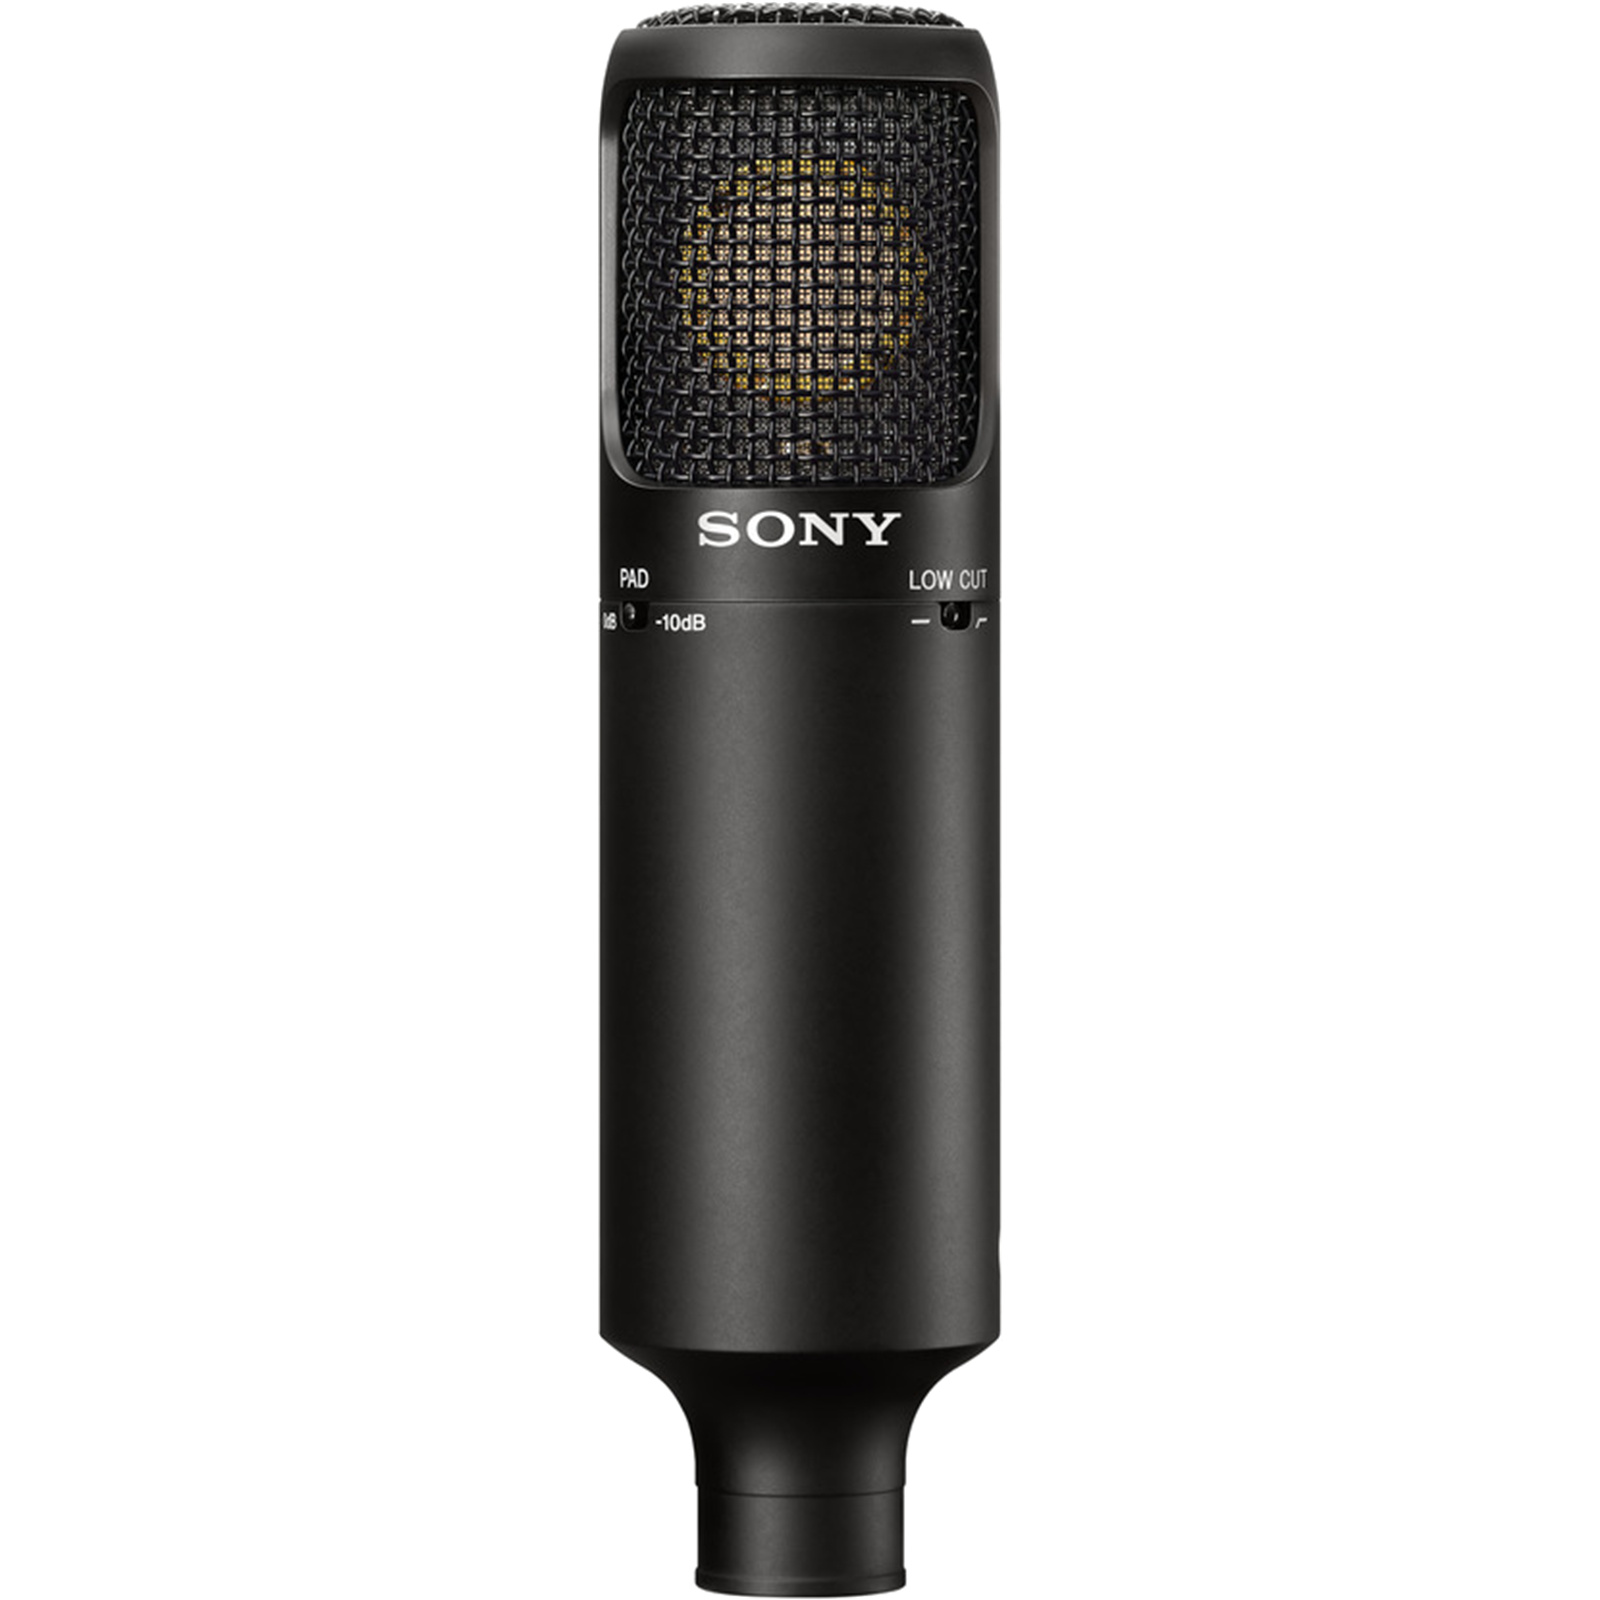 Sony C80 Uni-directional Professional Condenser Microphone for Voice / Vocal Recording - XLR connector - Low-cut filter & 10dB pad - Carry case & shockmount suspension cradle included - NZ DEPOT